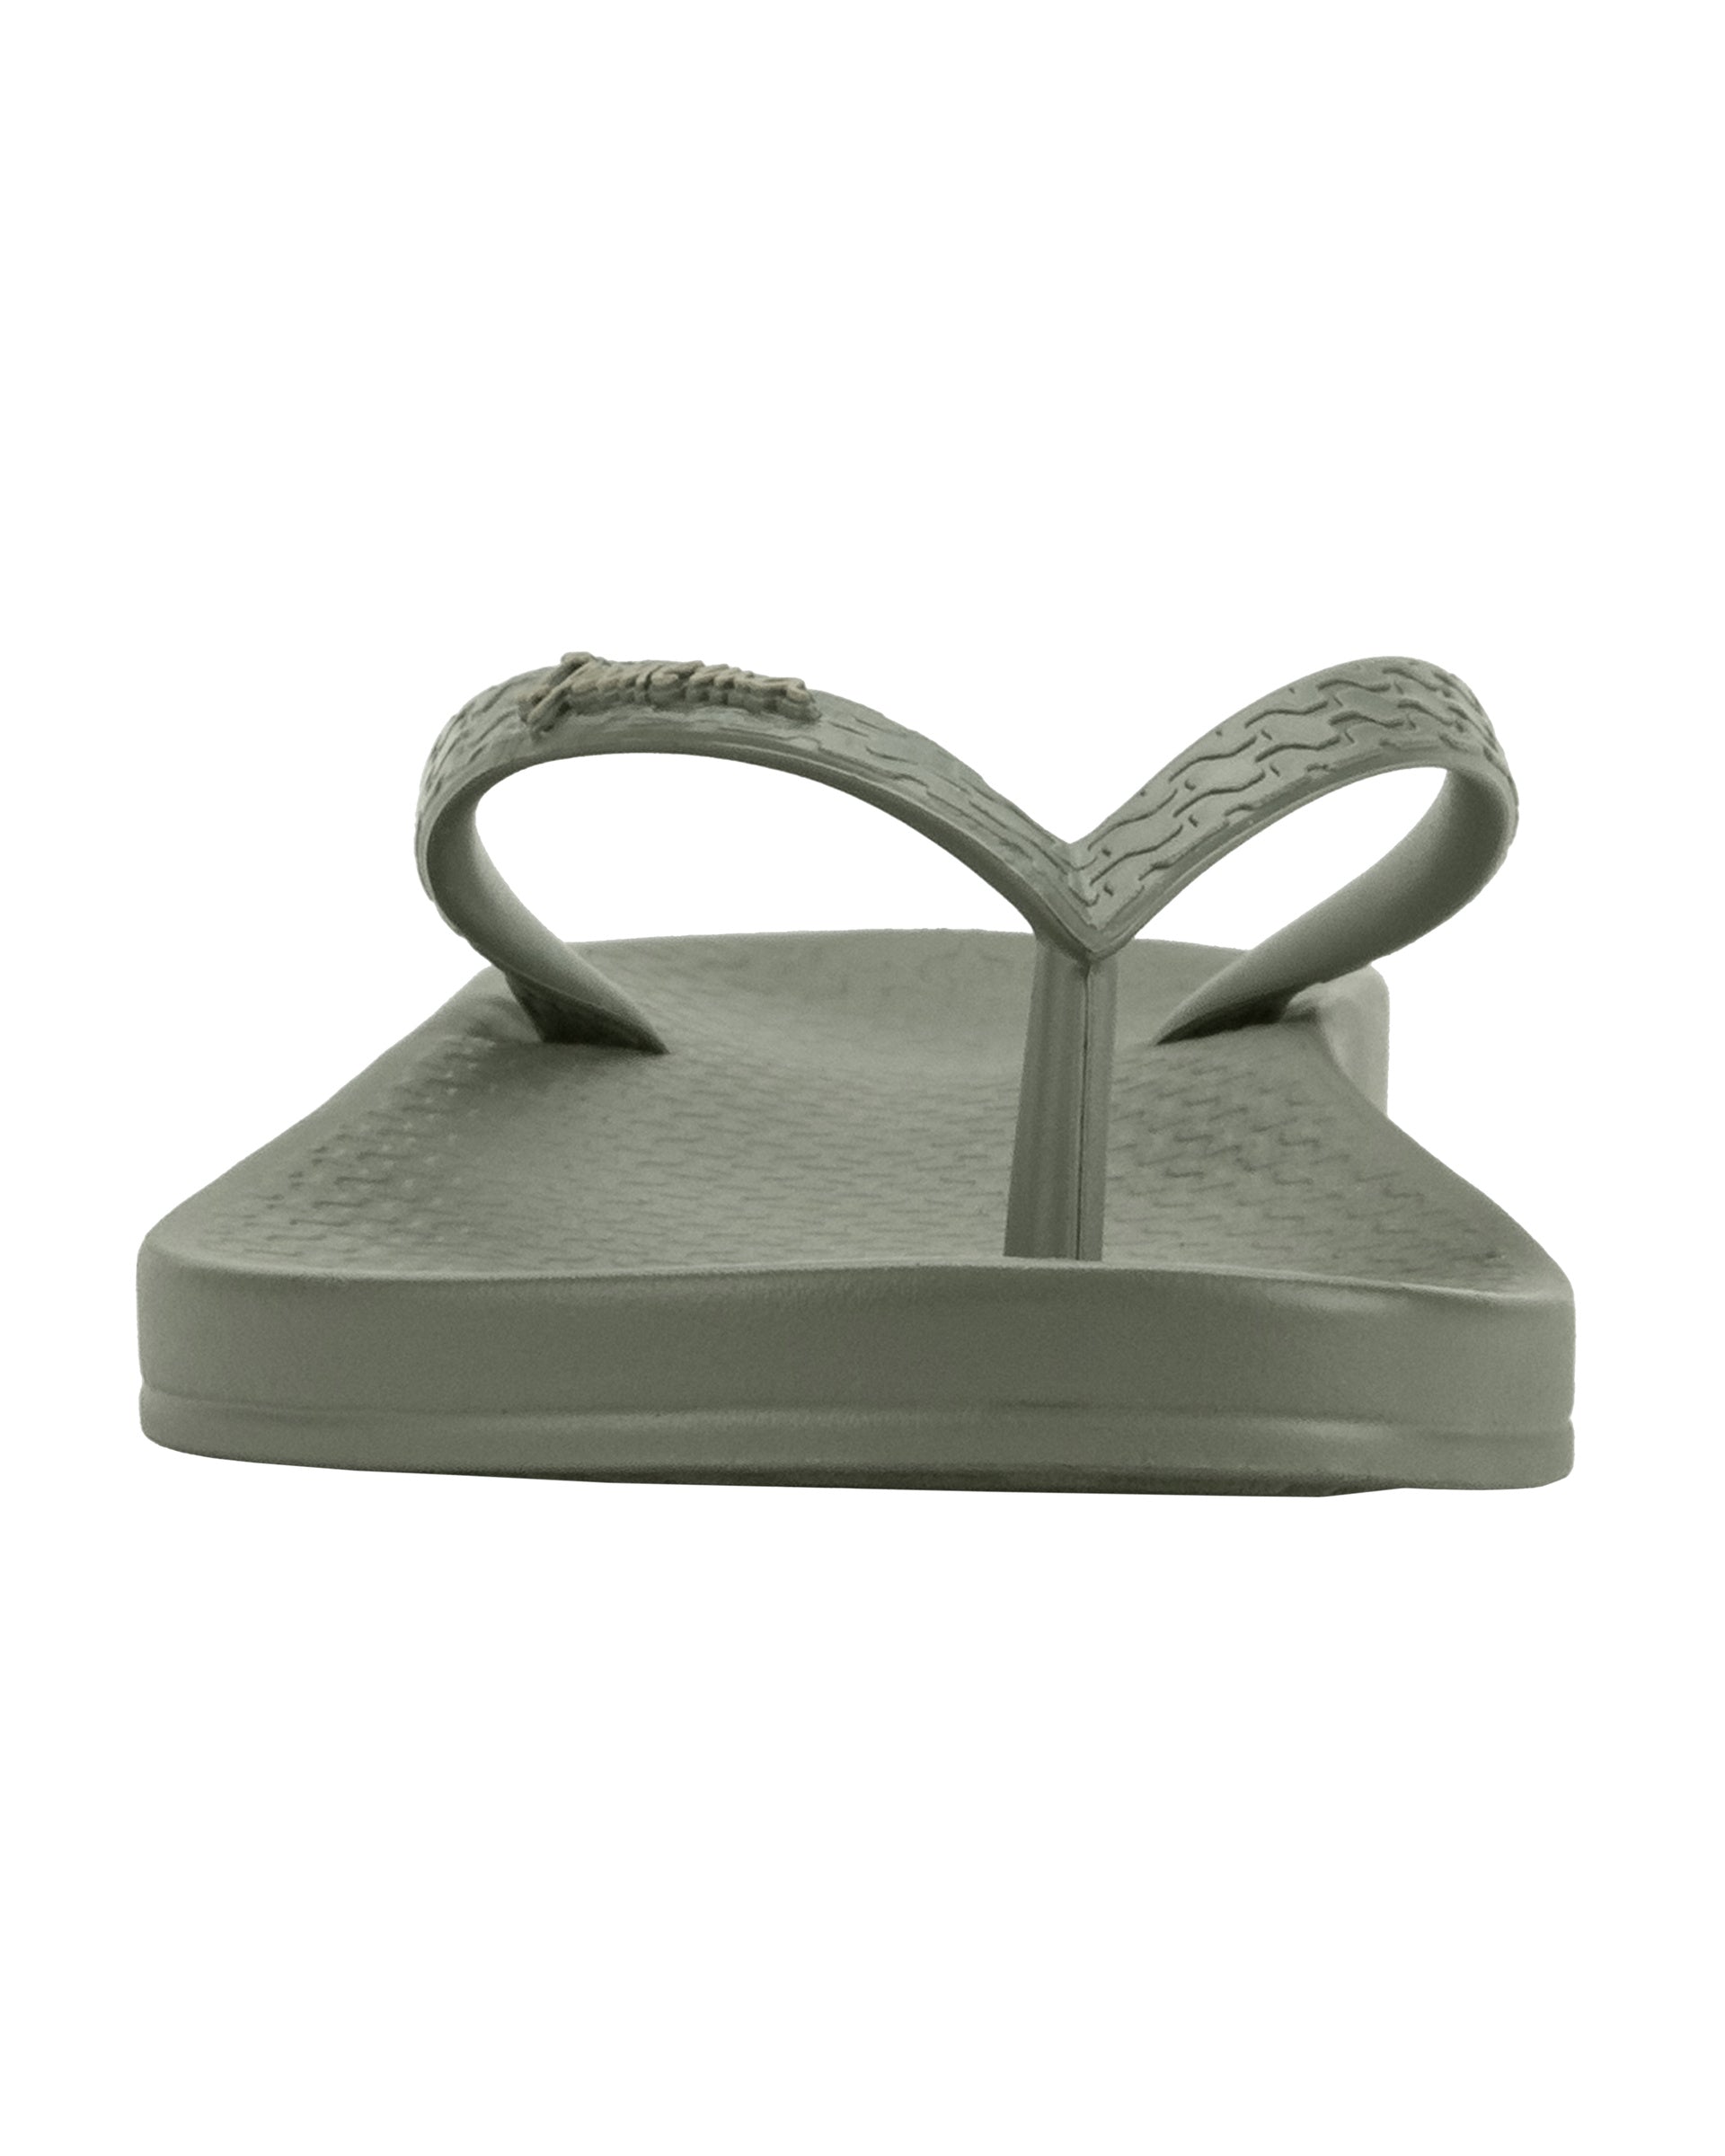 Front view of a green Ipanema Ana Colors women's flip flop.